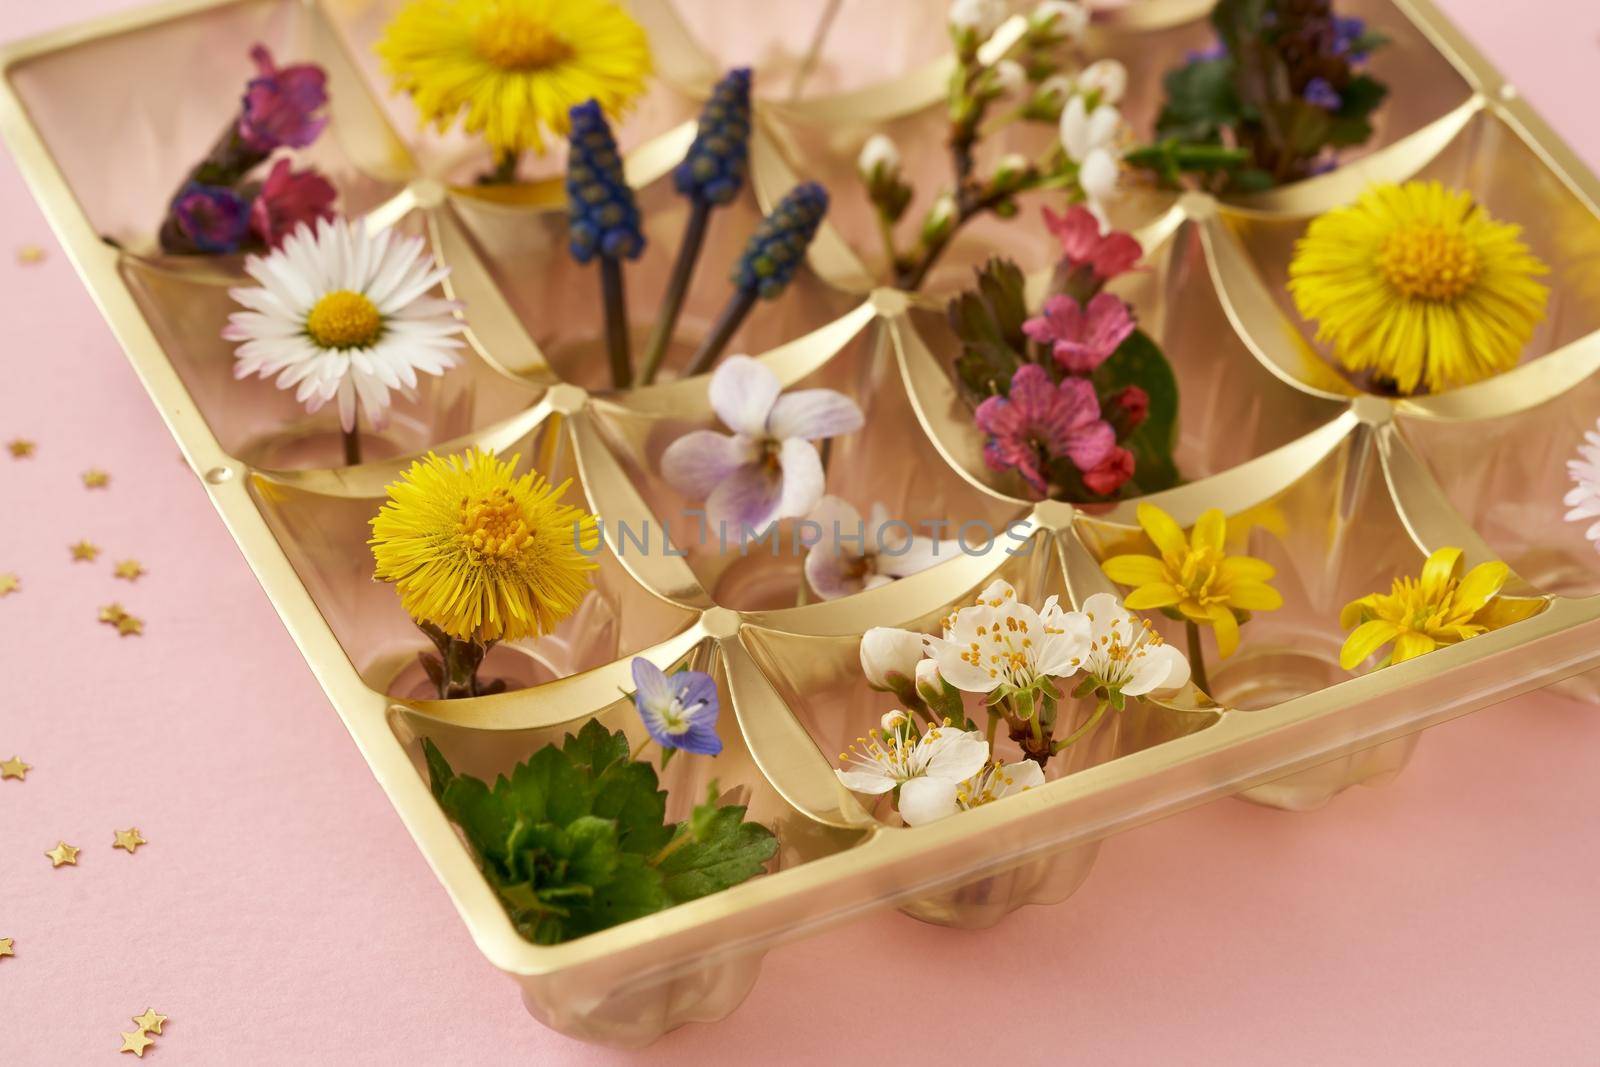 Empty box of chocolates filled with a selection of wild plants growing in spring - coltsfoot, lungwort, violet, veronica, common daisy by madeleine_steinbach